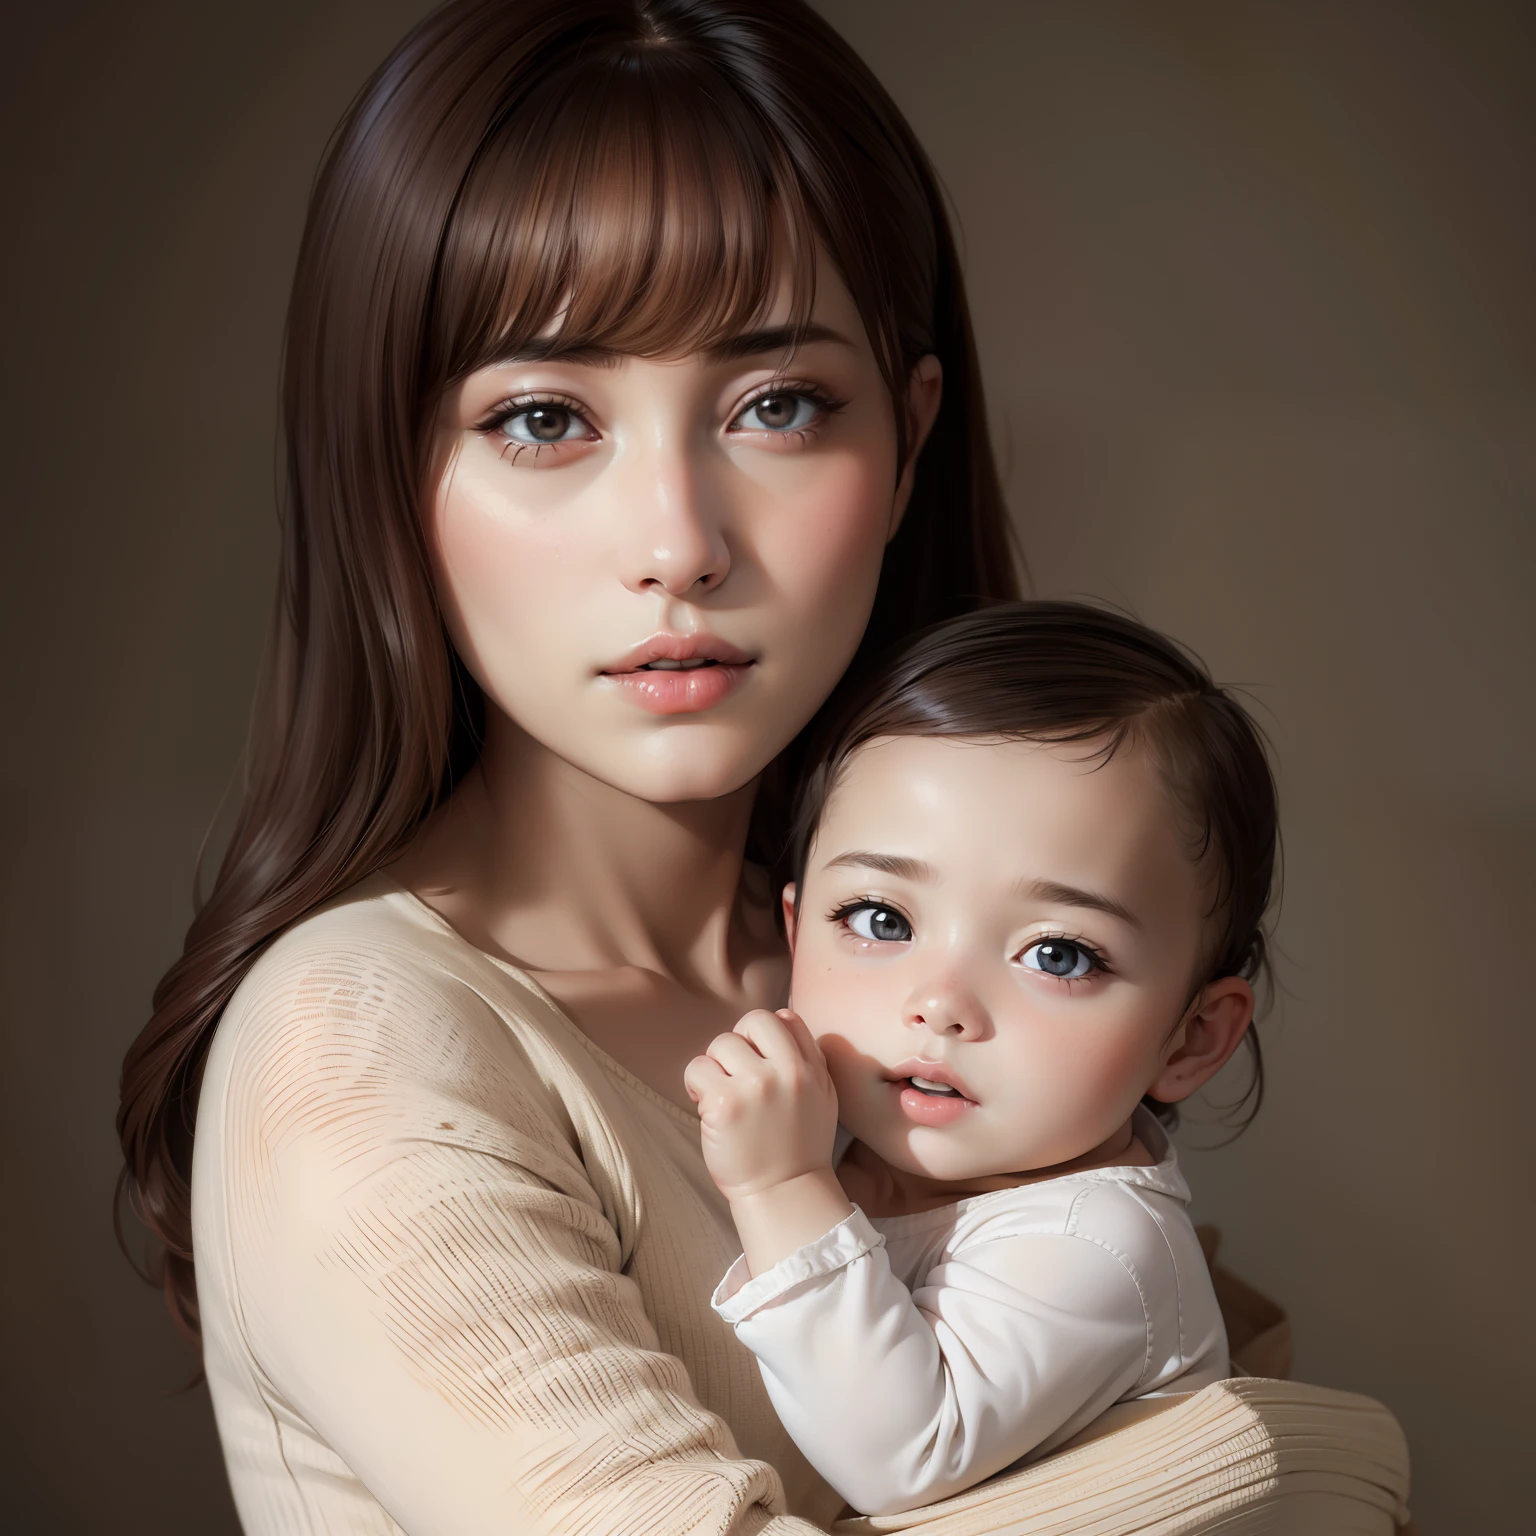 Cute Girl with her baby , photo REALISTIC high quality ultra 8k image